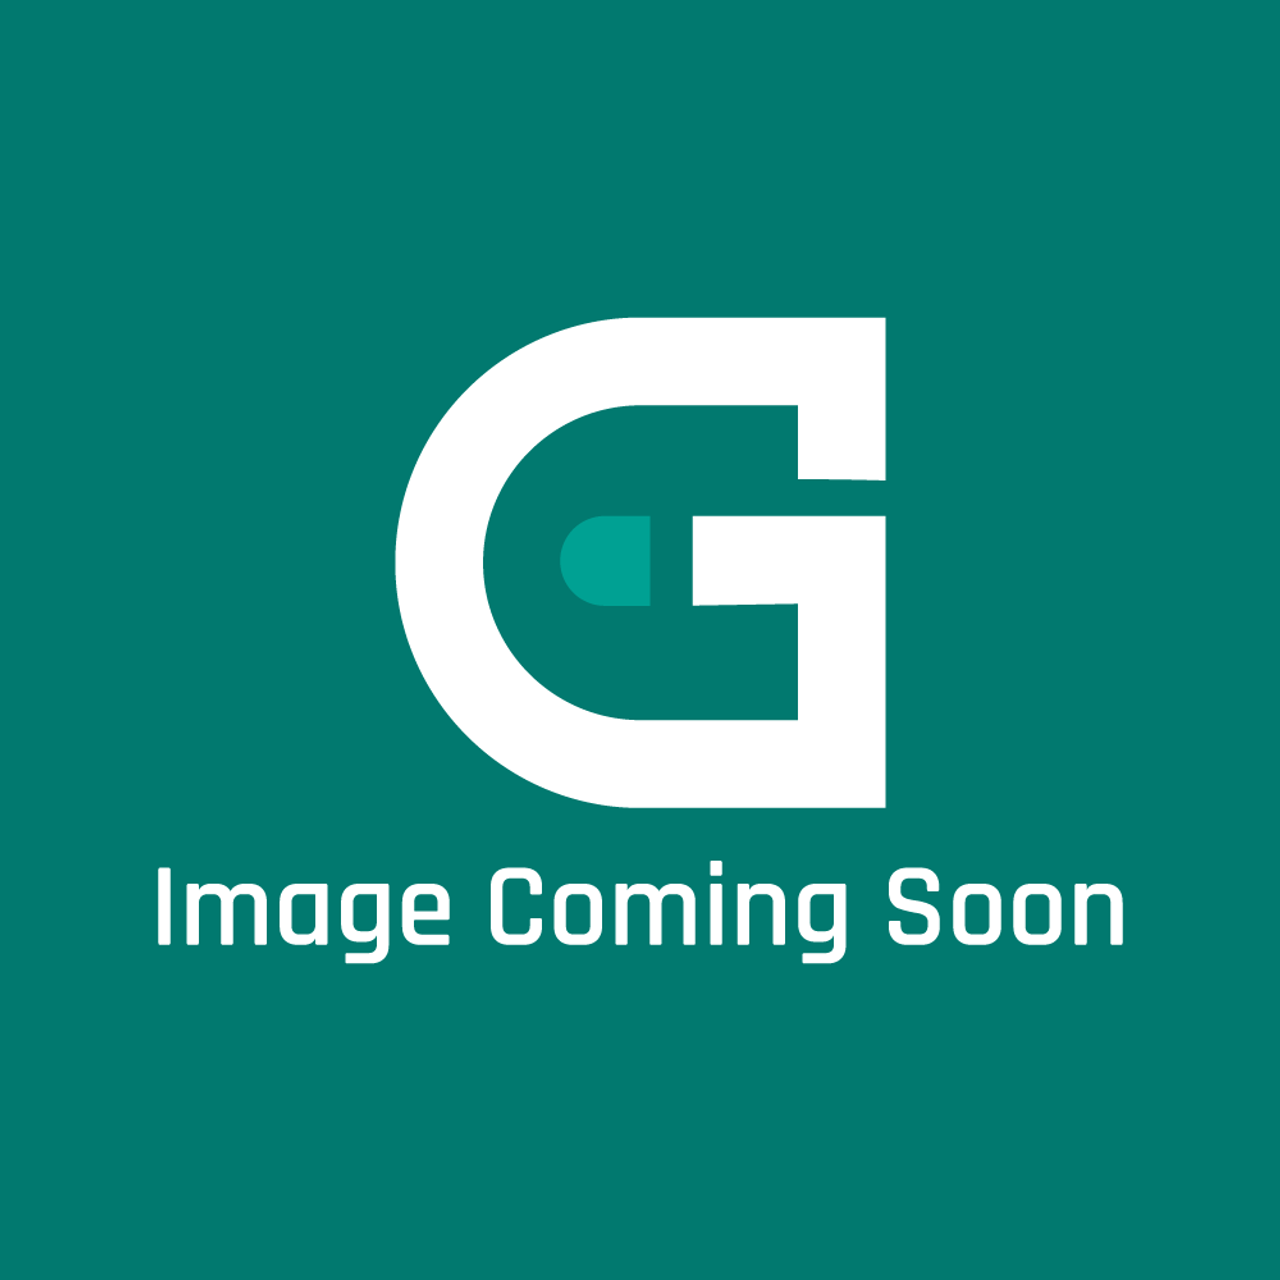 Frigidaire - Electrolux 5304501345 Panel - Image Coming Soon!